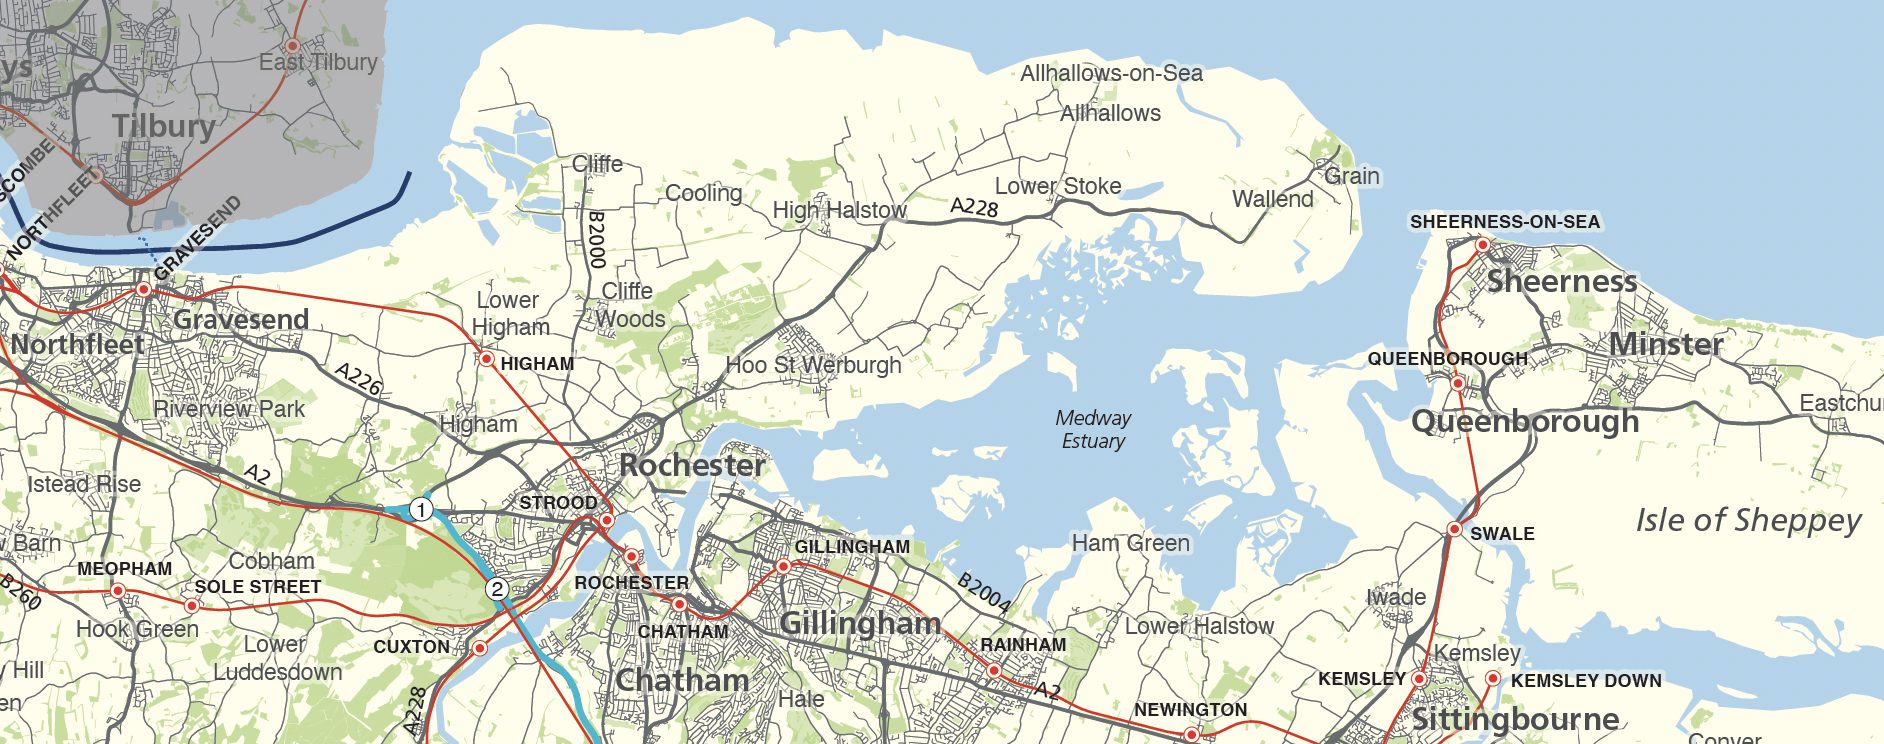 Detail from Kent county map